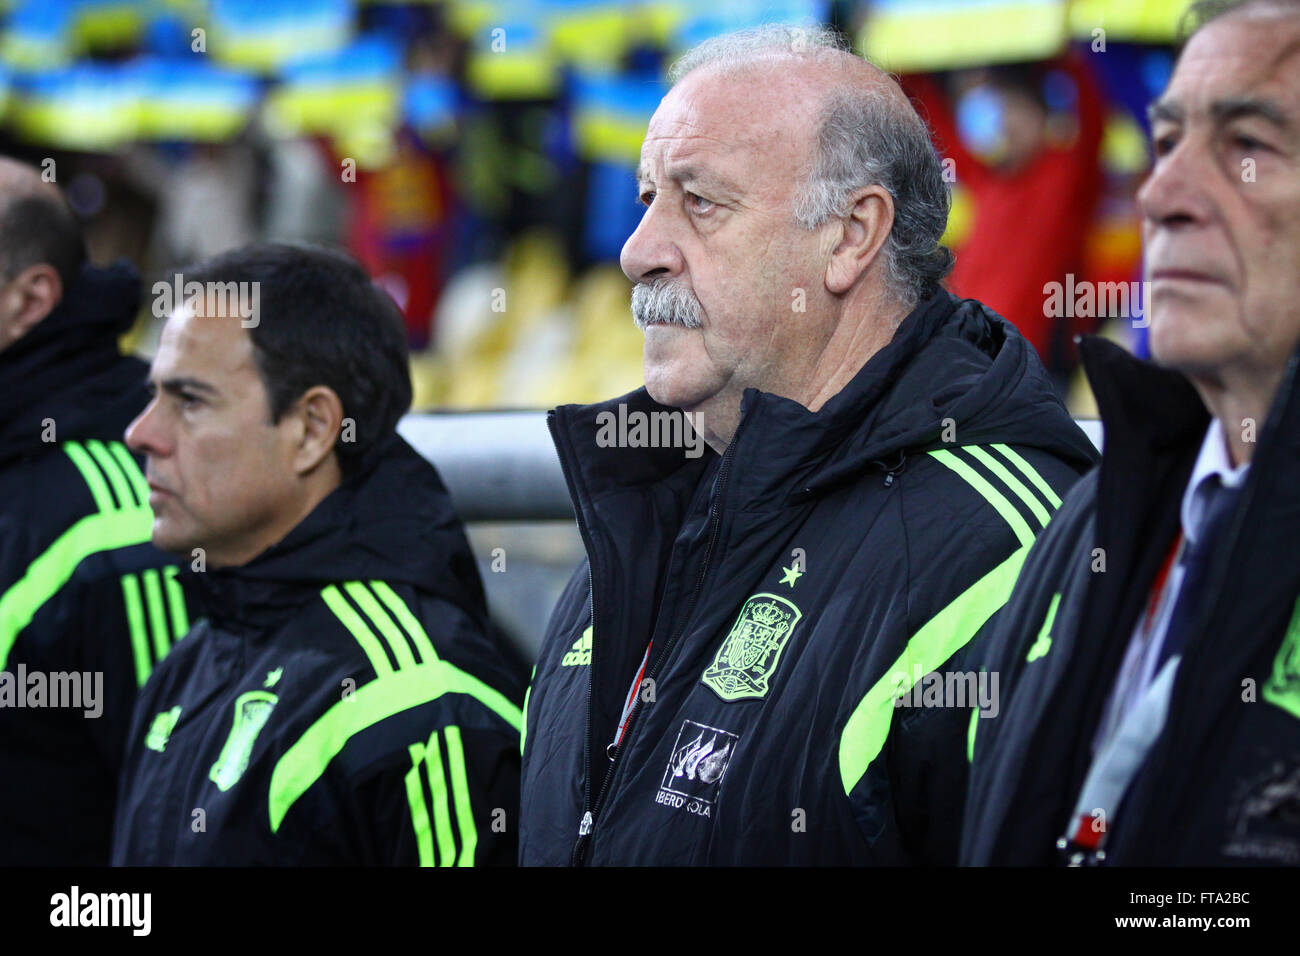 KYIV, UKRAINE - OCTOBER 12, 2015: Head coach of Spain National football team Vicente del Bosque looks on during UEFA EURO 2016 Q Stock Photo